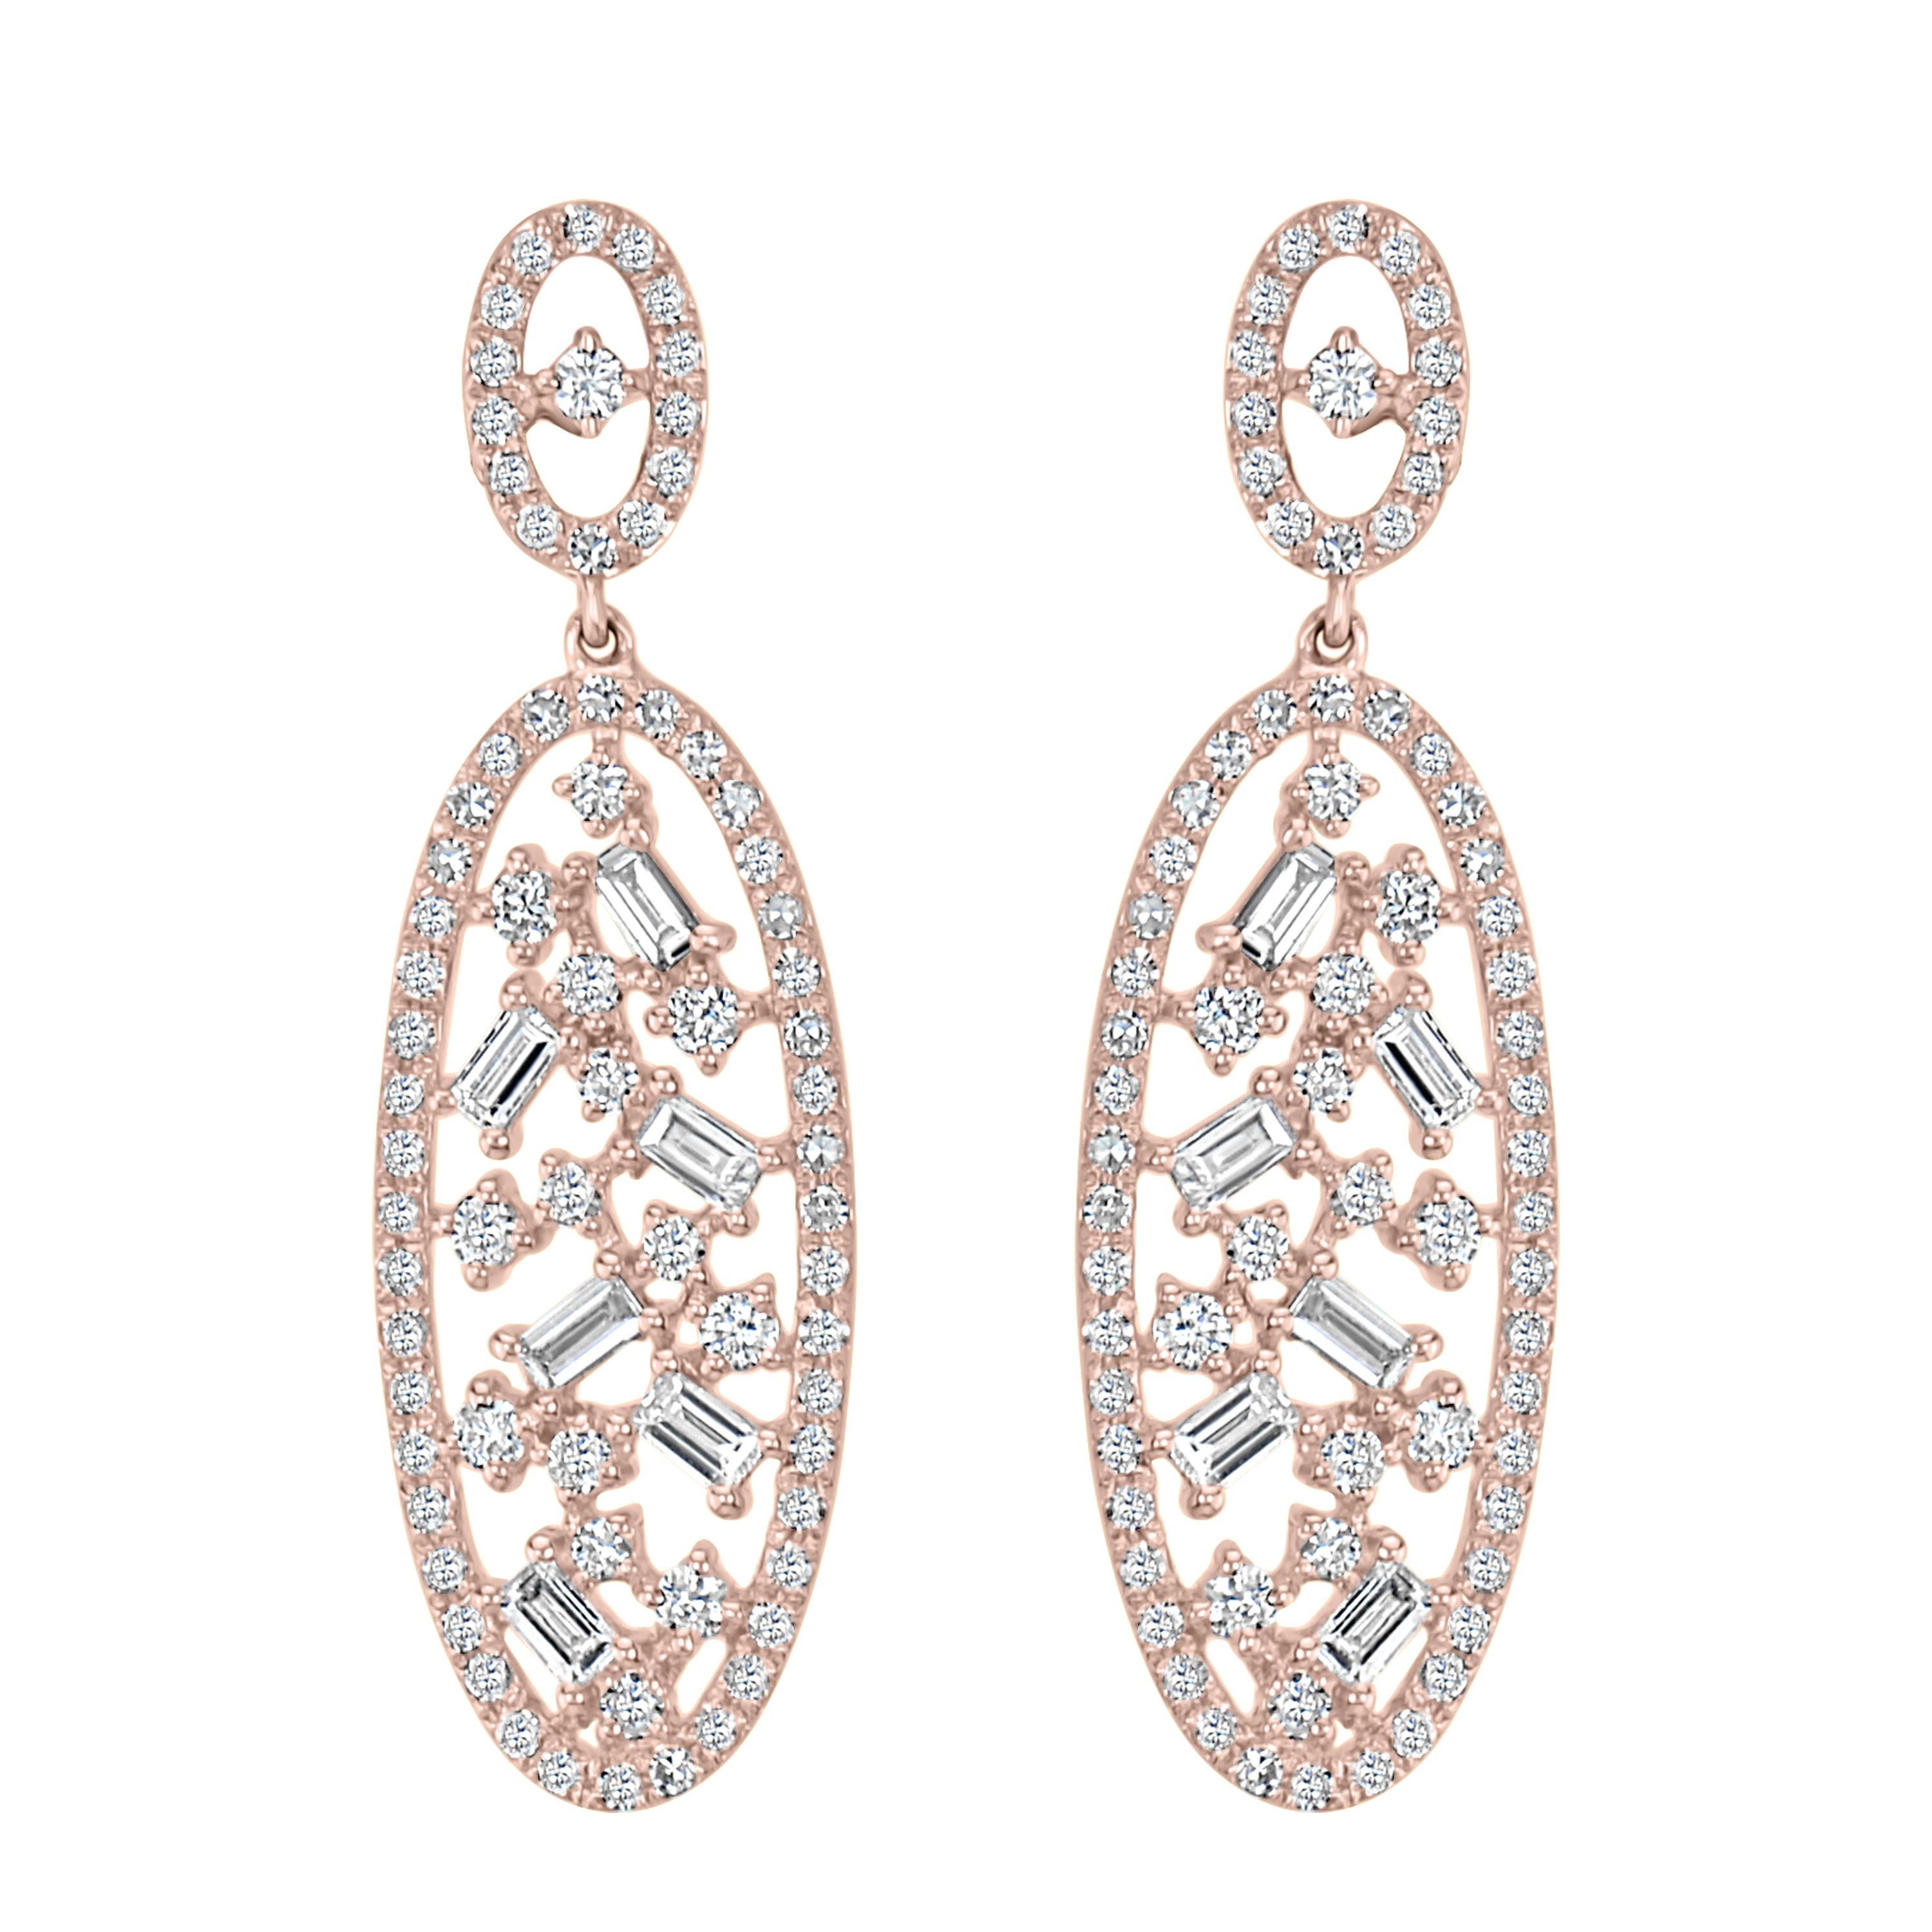 These Luxle oval drop earrings are featured 12 baguette diamonds and 142 small and large round diamonds. These earrings have gold posts with clutch backs.

Please follow the Luxury Jewels storefront to view the latest collections & exclusive one of